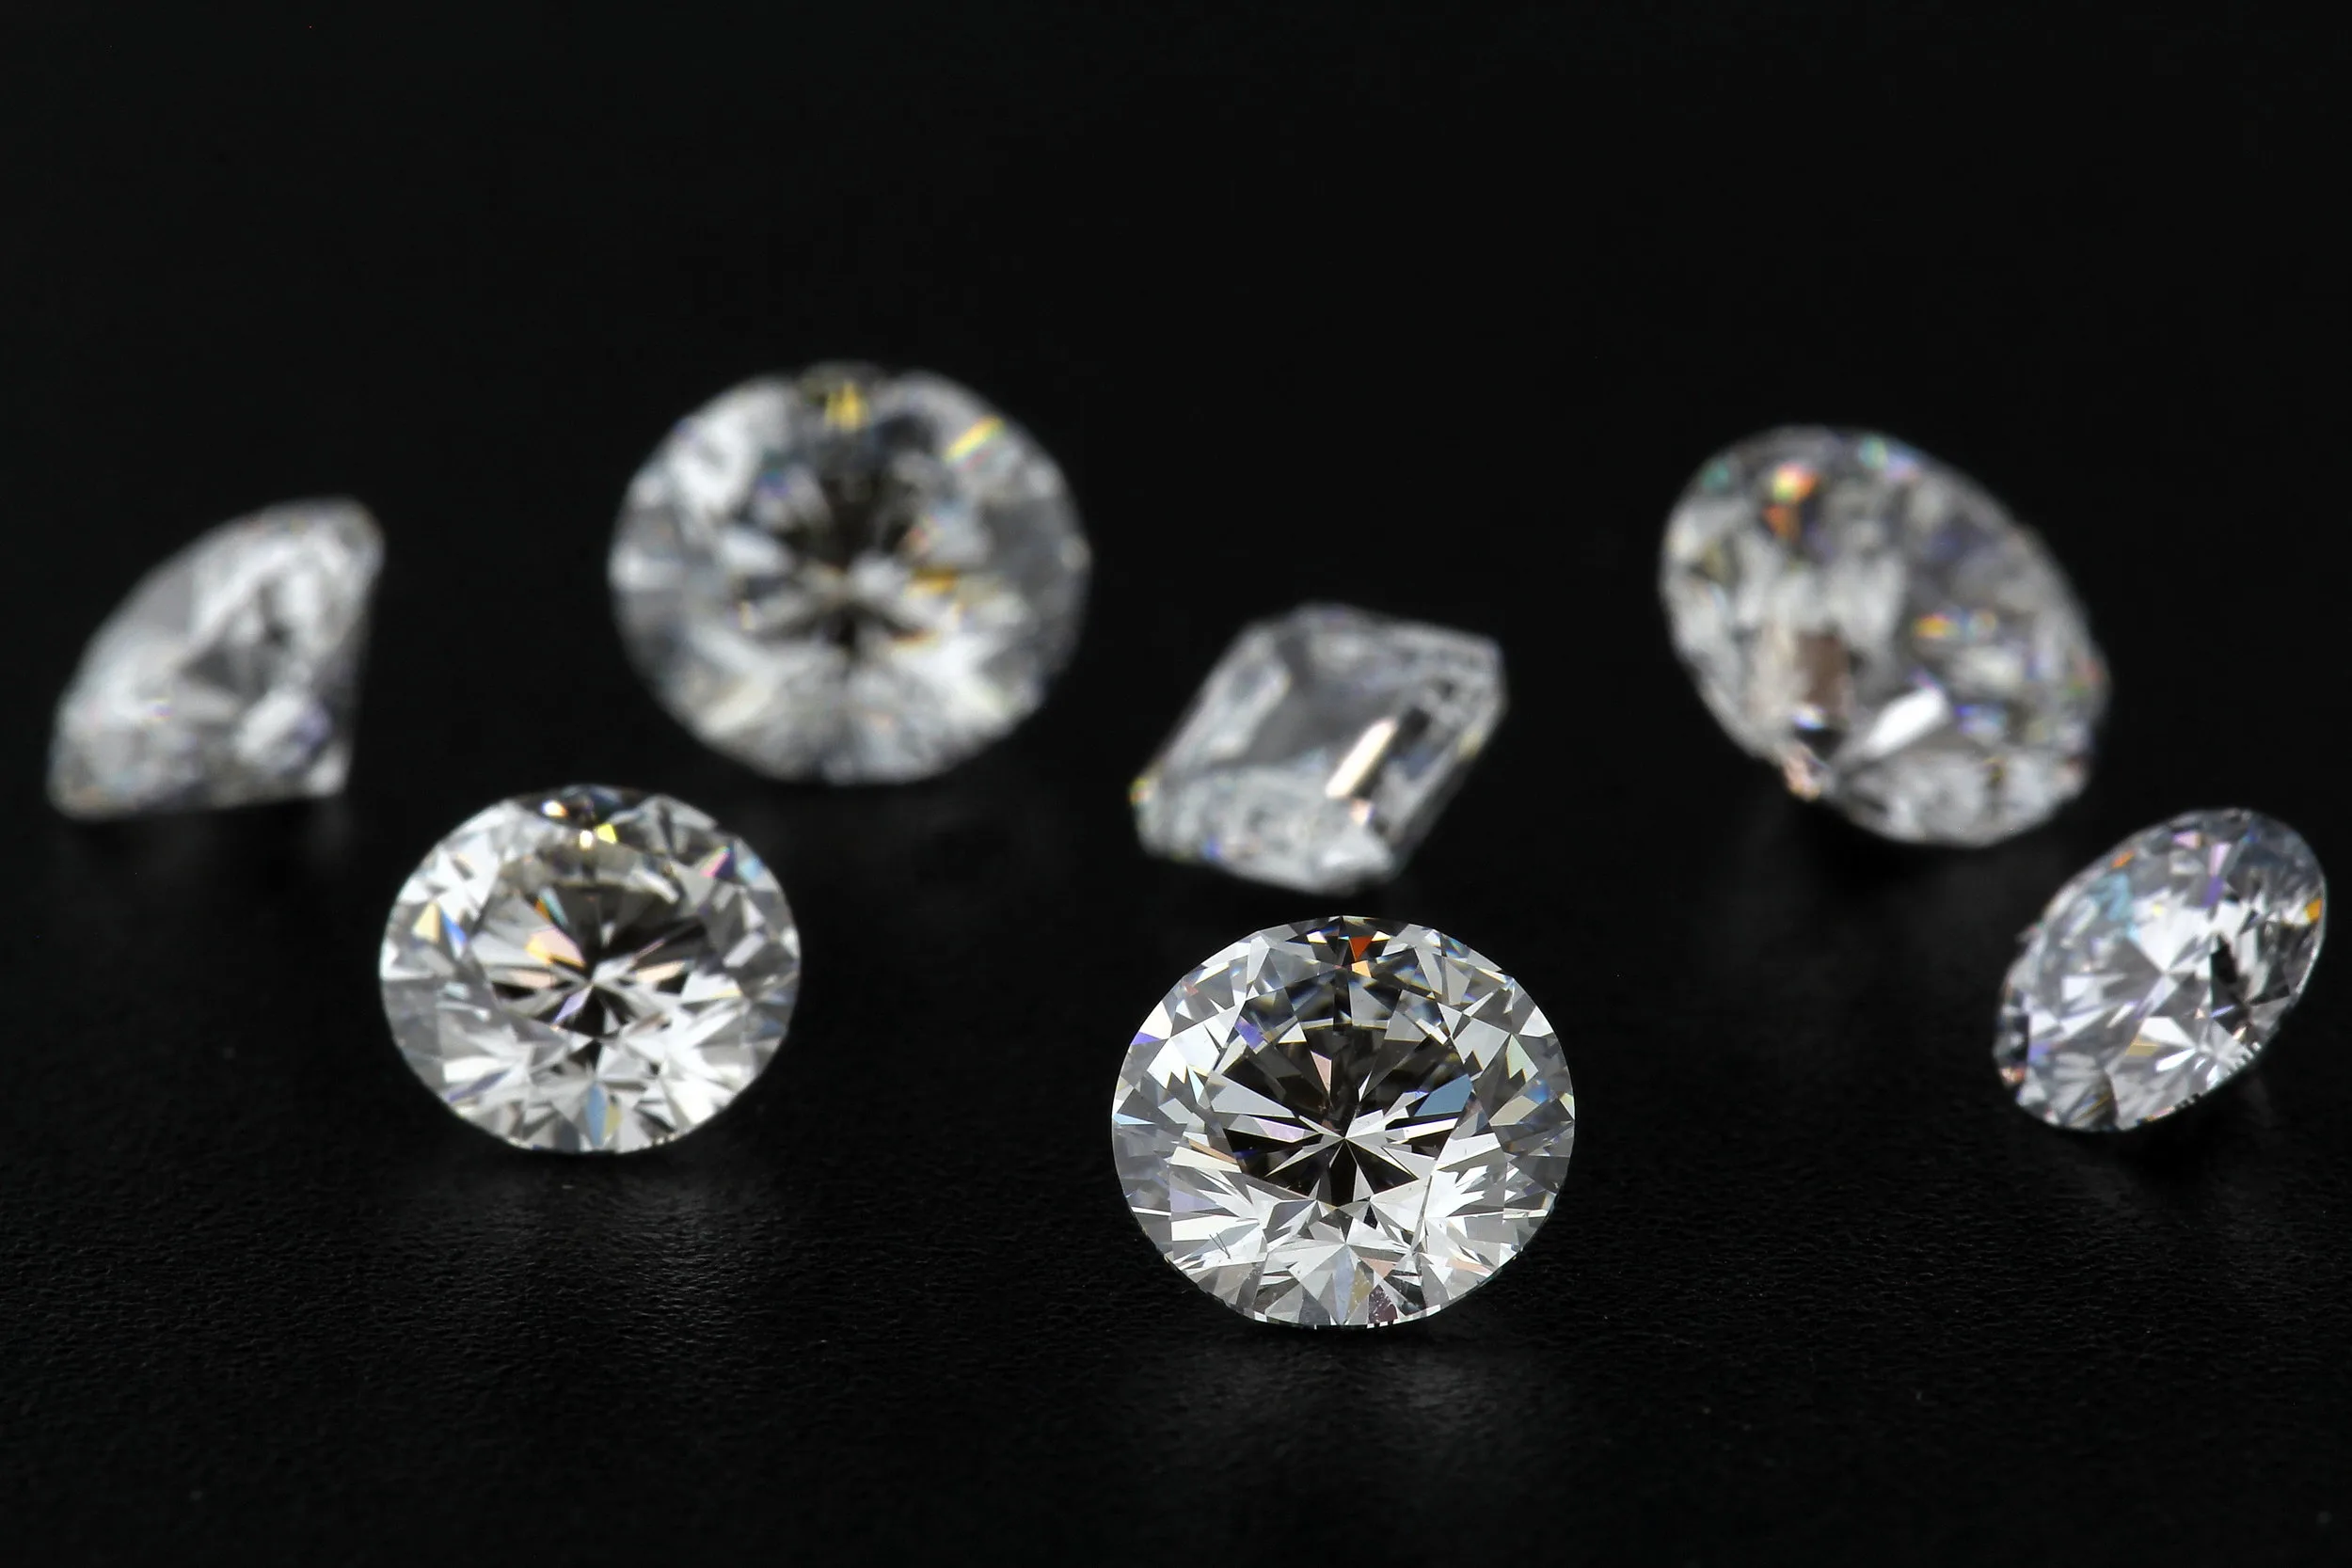 Craft - Leading manufacturer of Lab Grown Rough & Polished Diamond